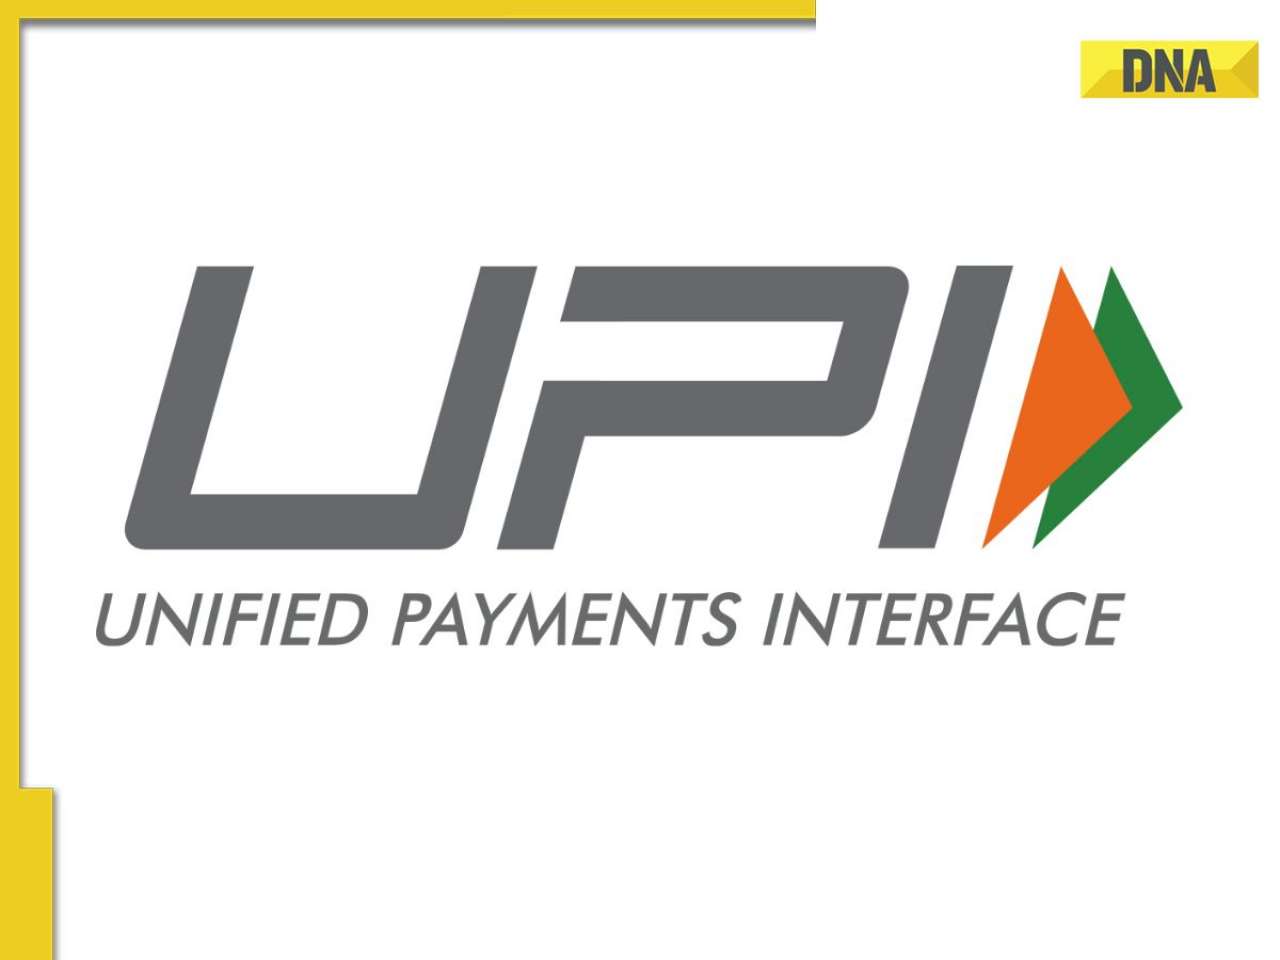 Google Pay, PhonePe get better grip on UPI market, companies seek to end free UPI transactions and charge…